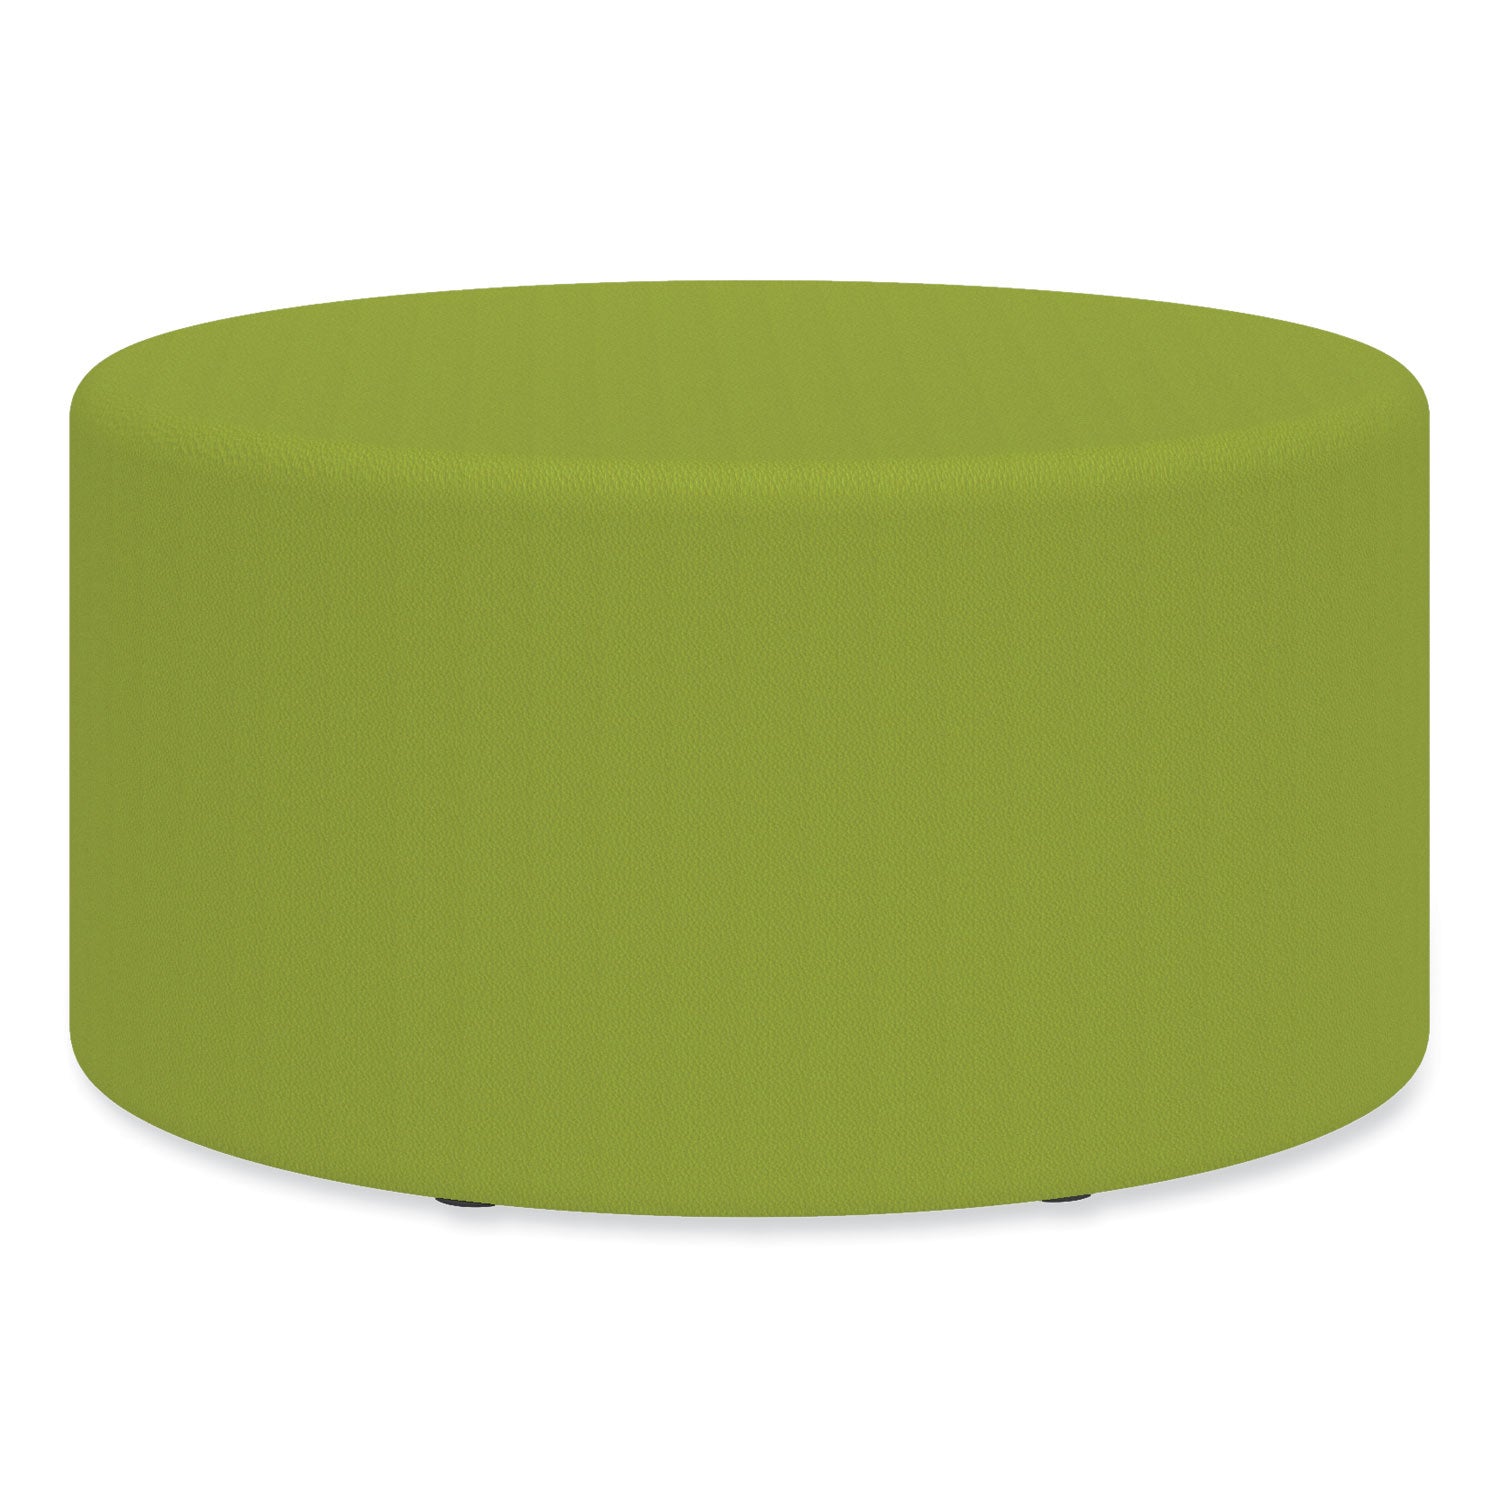 learn-30-cylinder-vinyl-ottoman-30w-x-30d-x-18h-green-ships-in-1-3-business-days_saf8123gv - 1